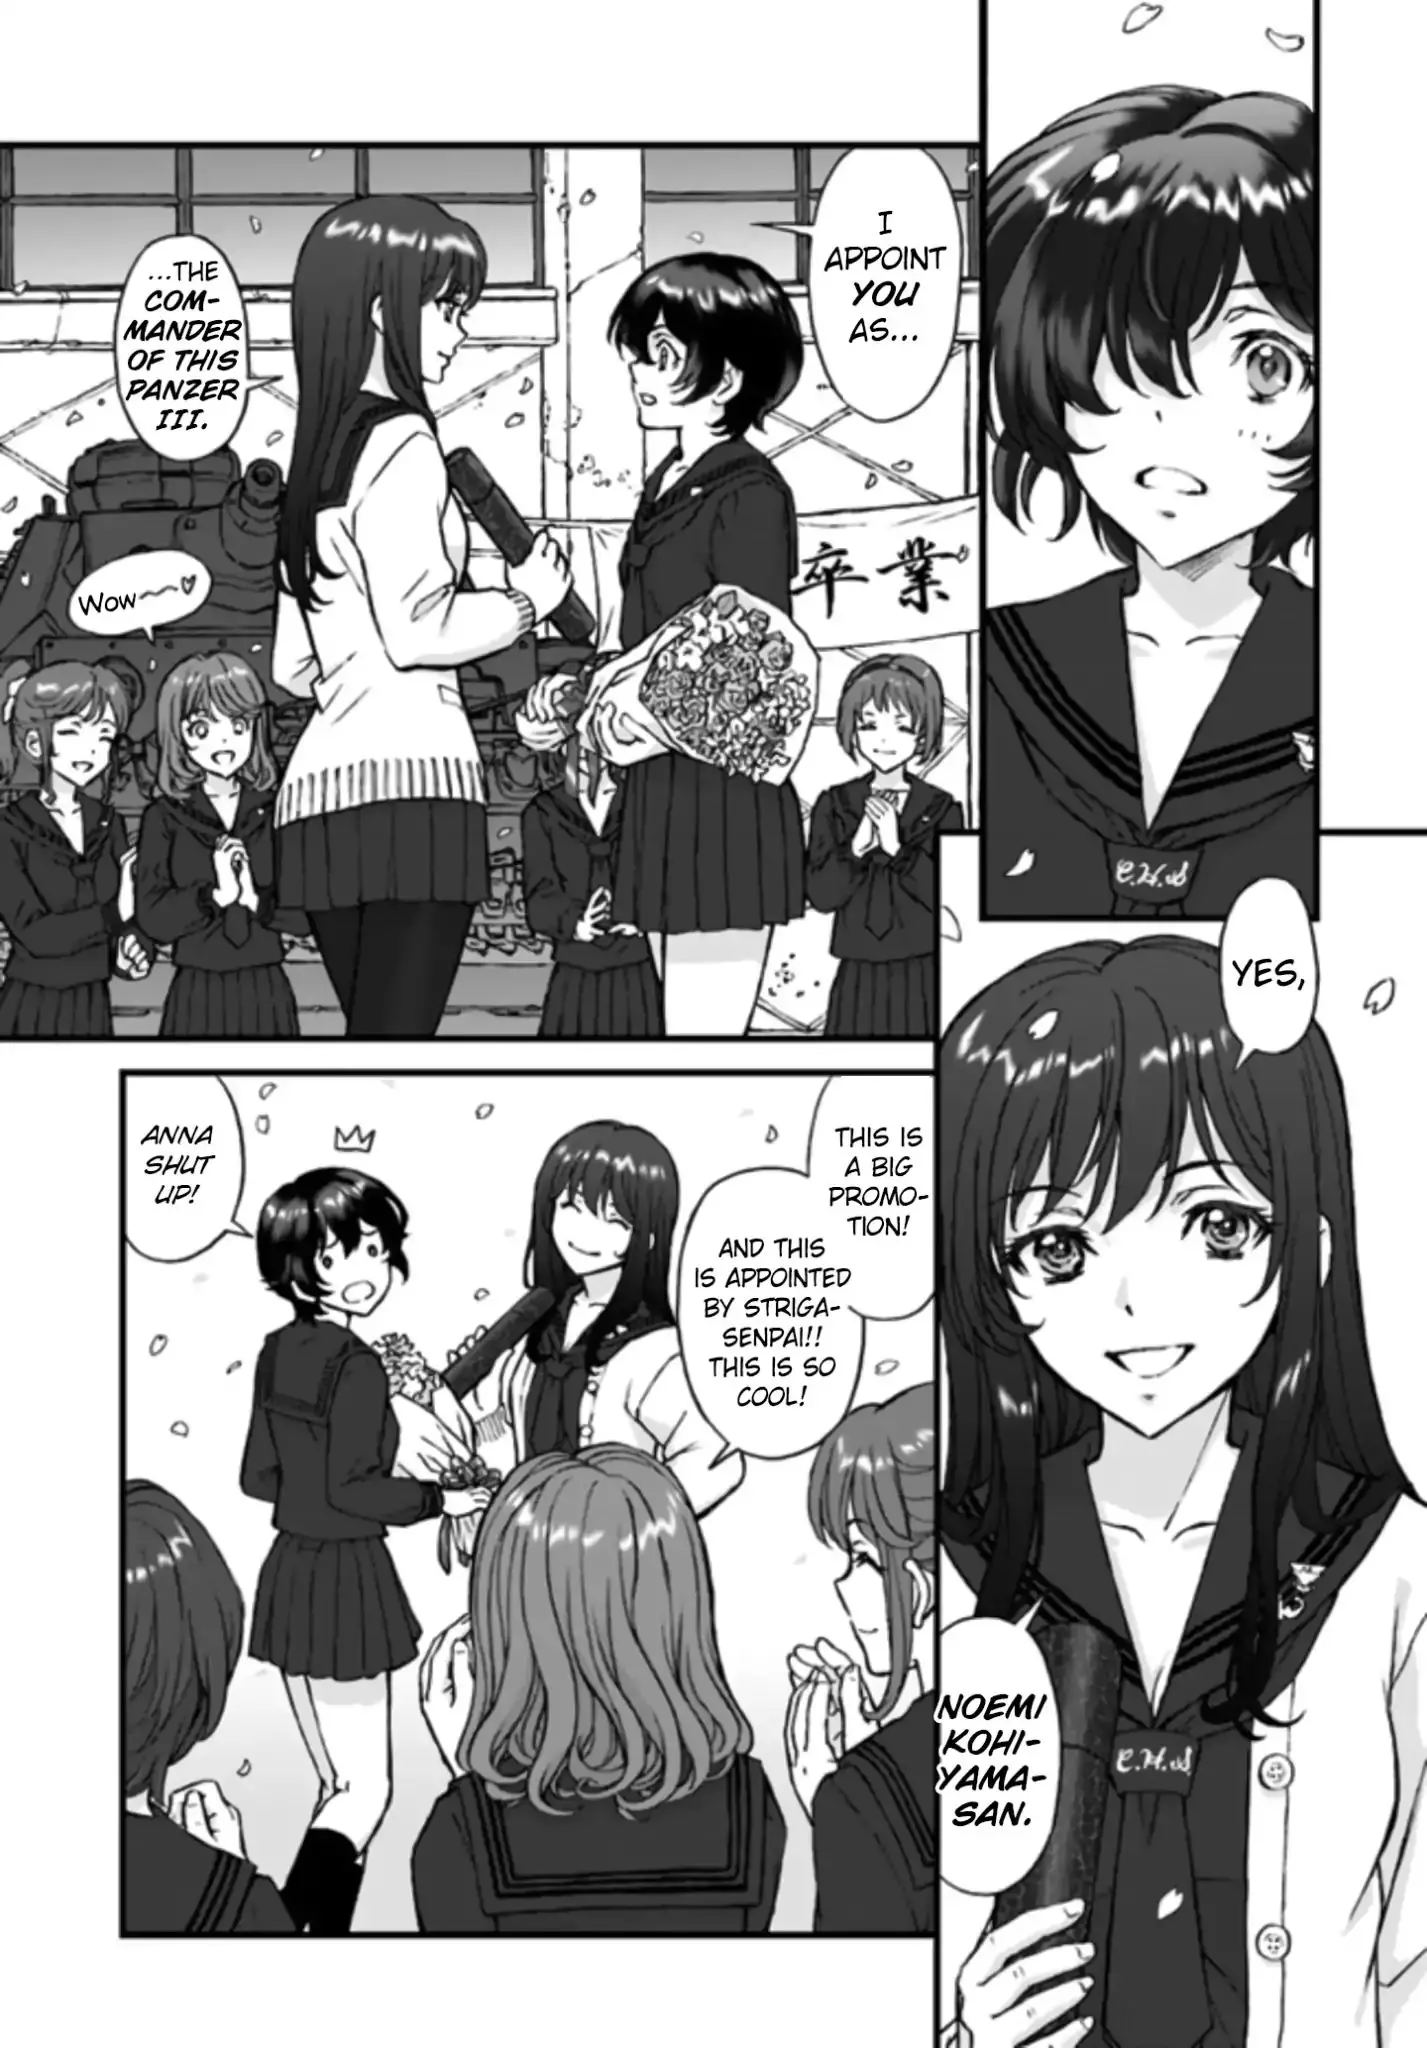 Girls Und Panzer - The Fir Tree And The Iron-Winged Witch - 2 page 9